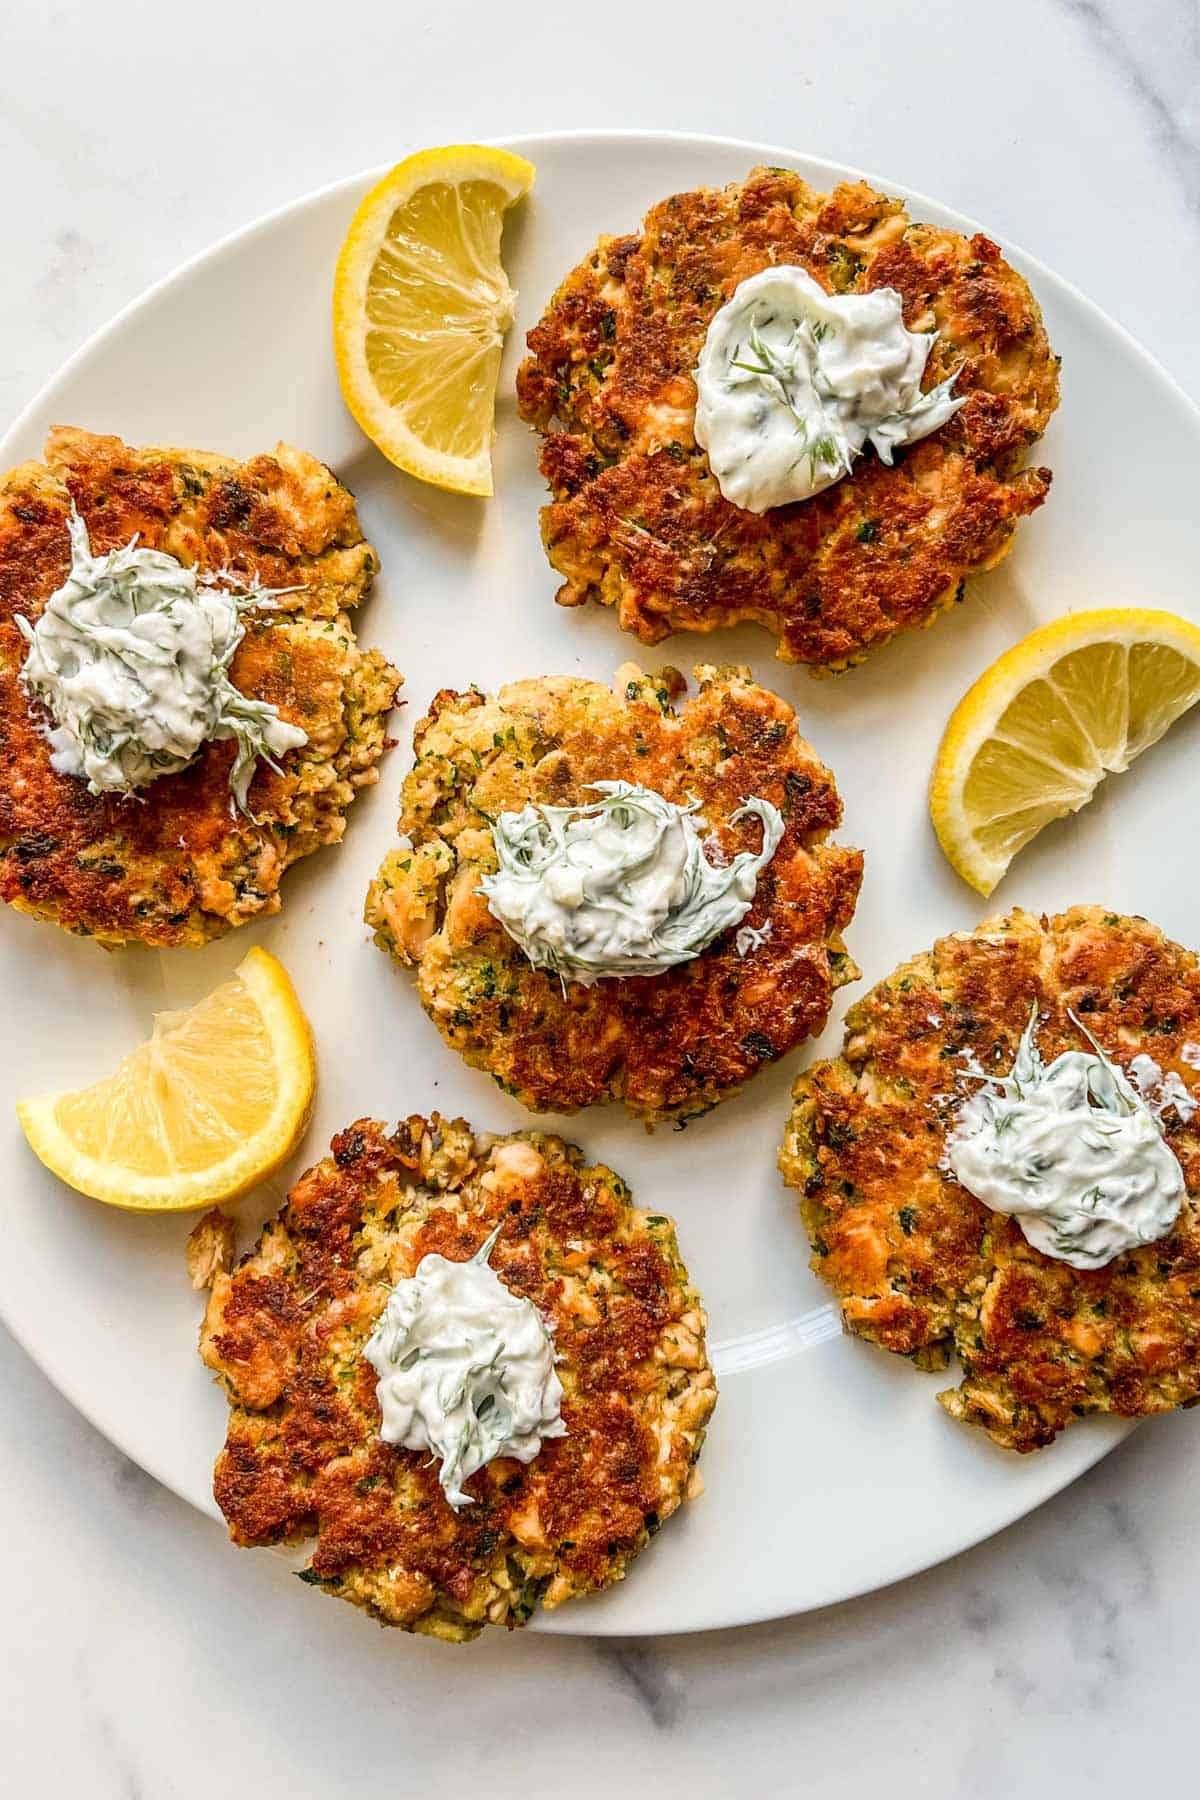 Salmon patties topped with dill sauce on a white plate with slices of lemon.